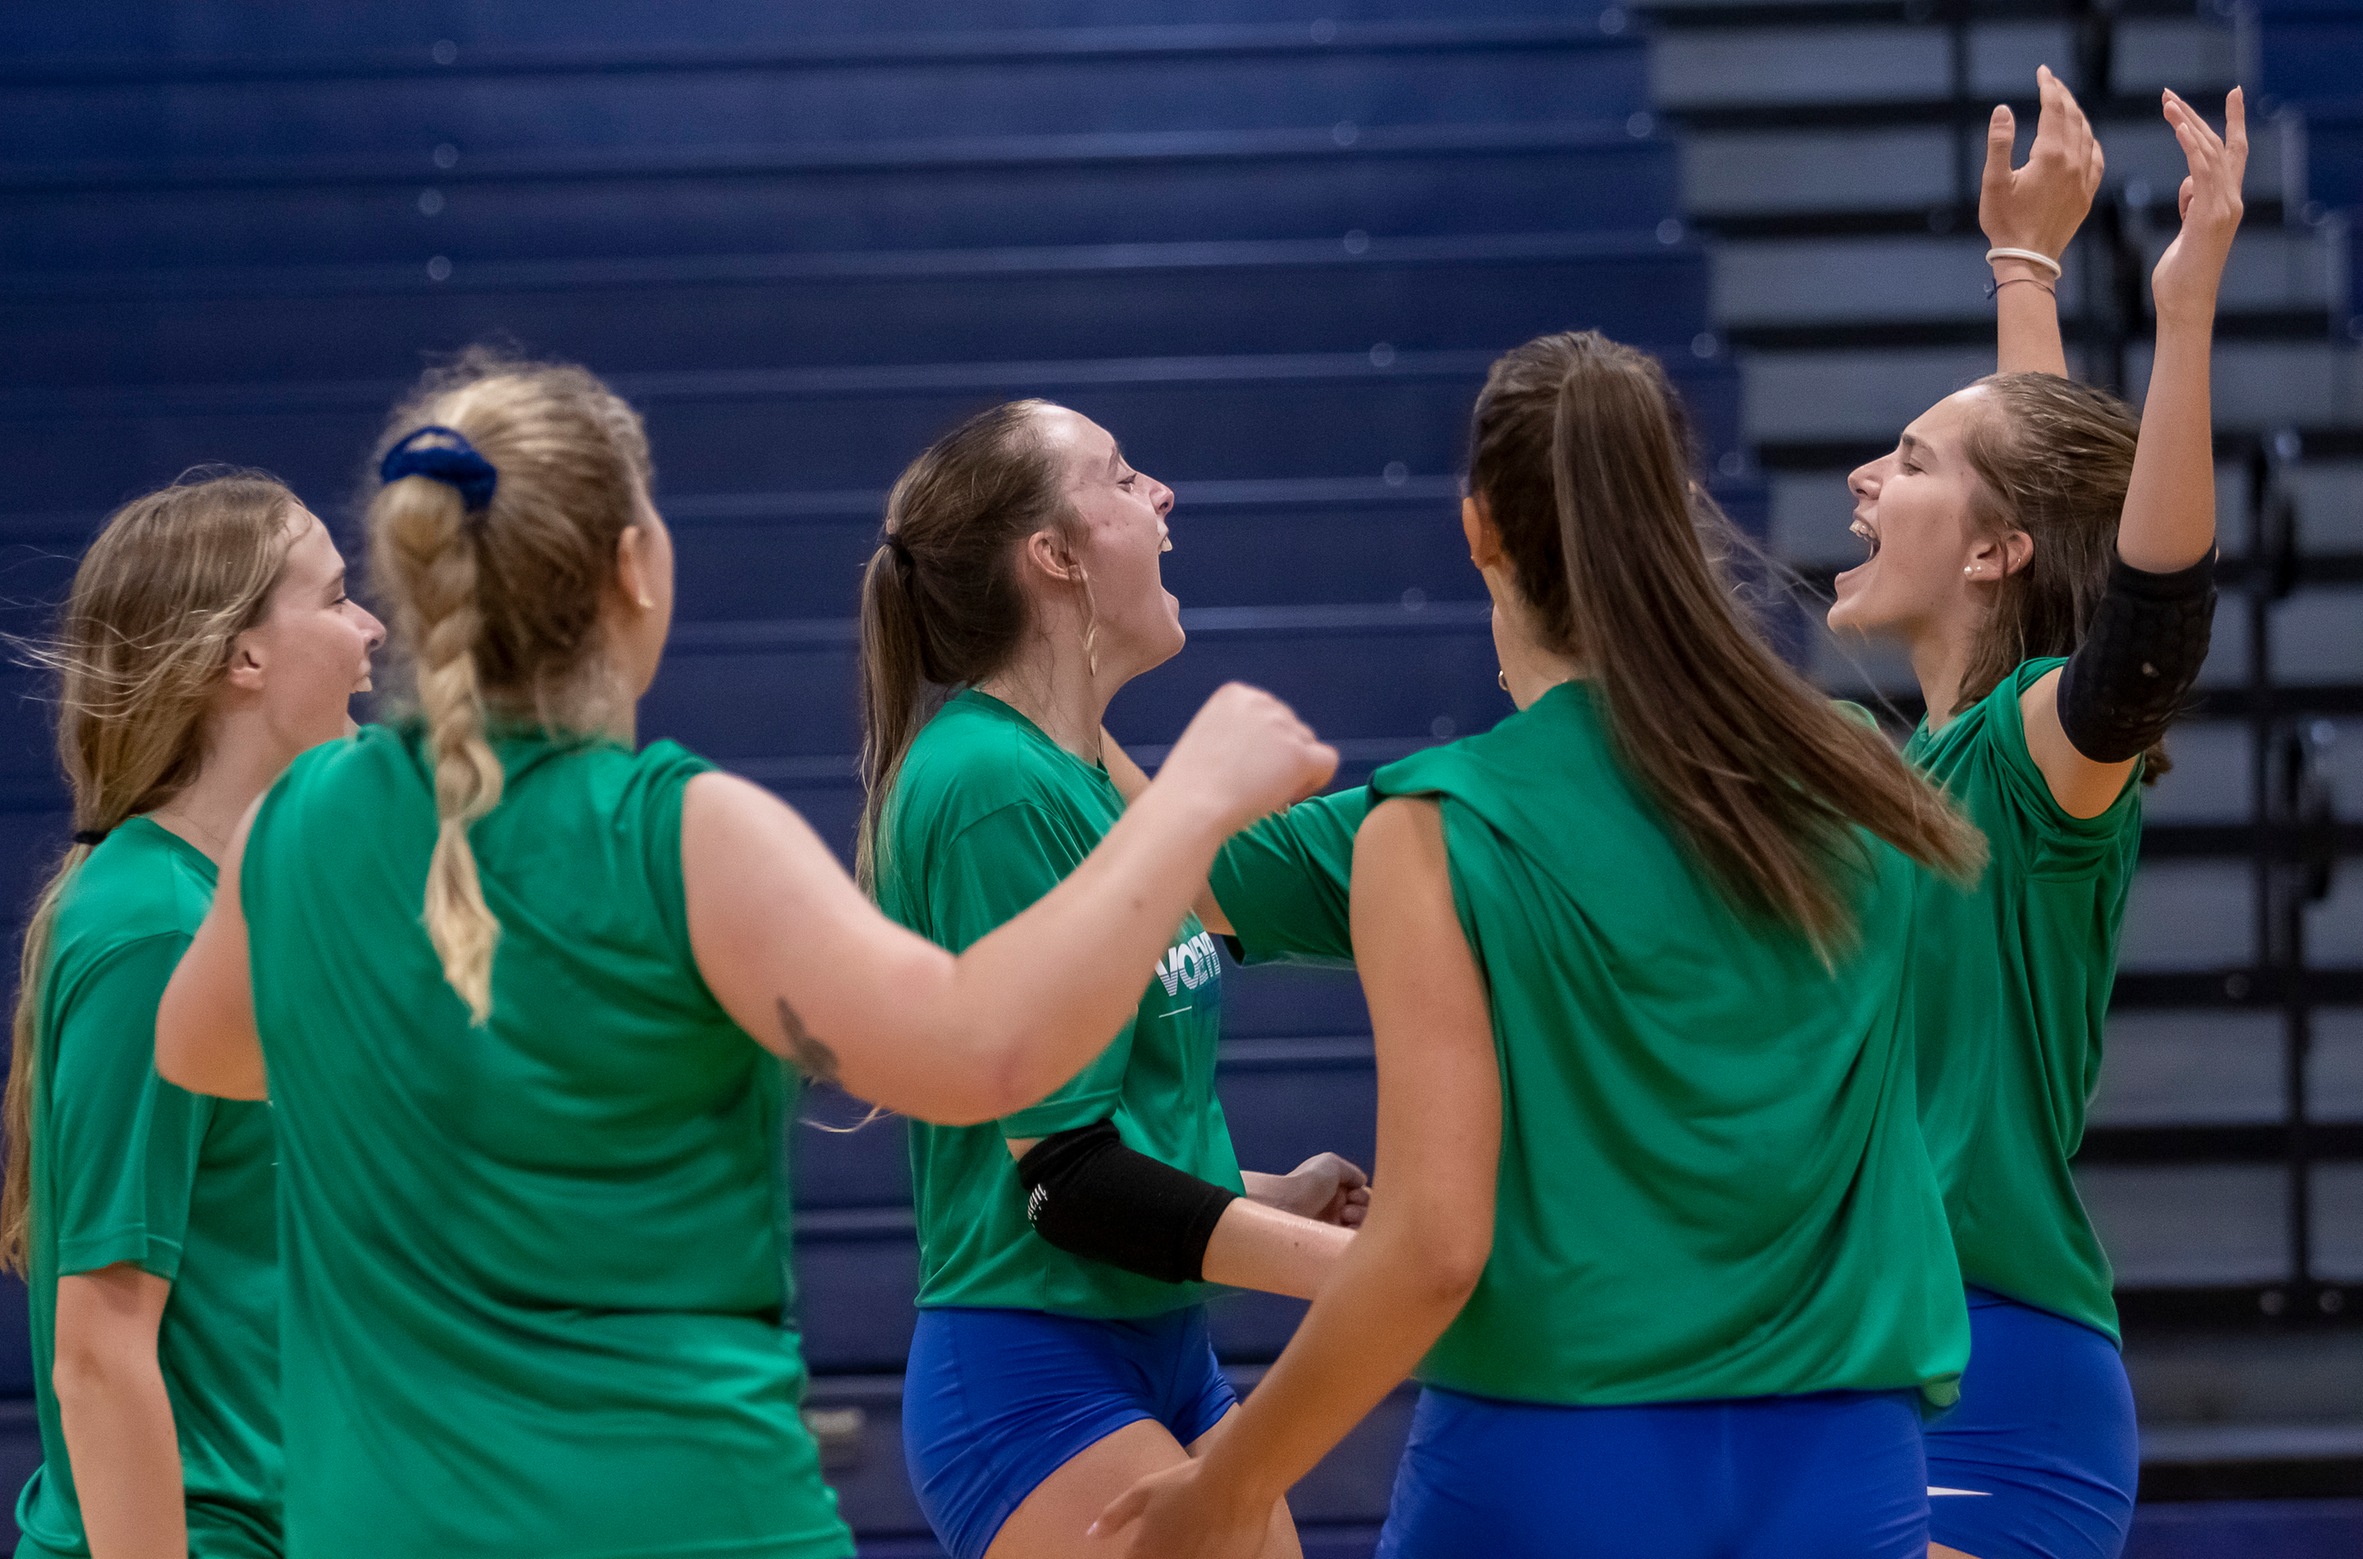 Women's volleyball team receiving votes in latest NJCAA Division I poll